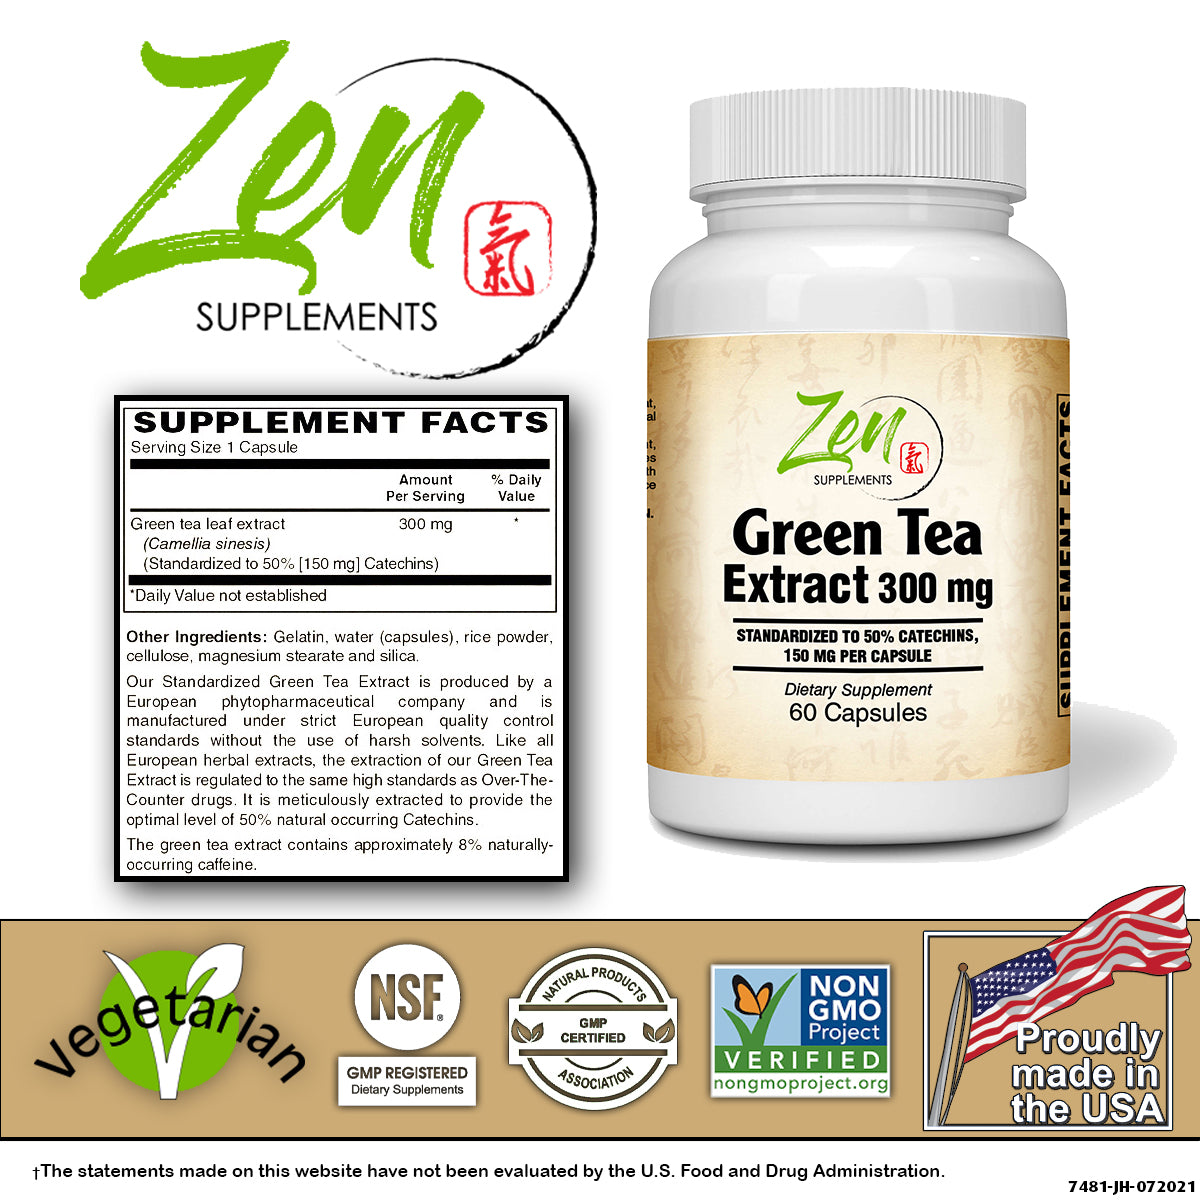 Zen Supplements - Green Tea Extract 300 Mg Supplement for Healthy Weight Support & Supports Healthy Heart, Metabolism & Energy with Antioxidants & Polyphenols 60-Caps